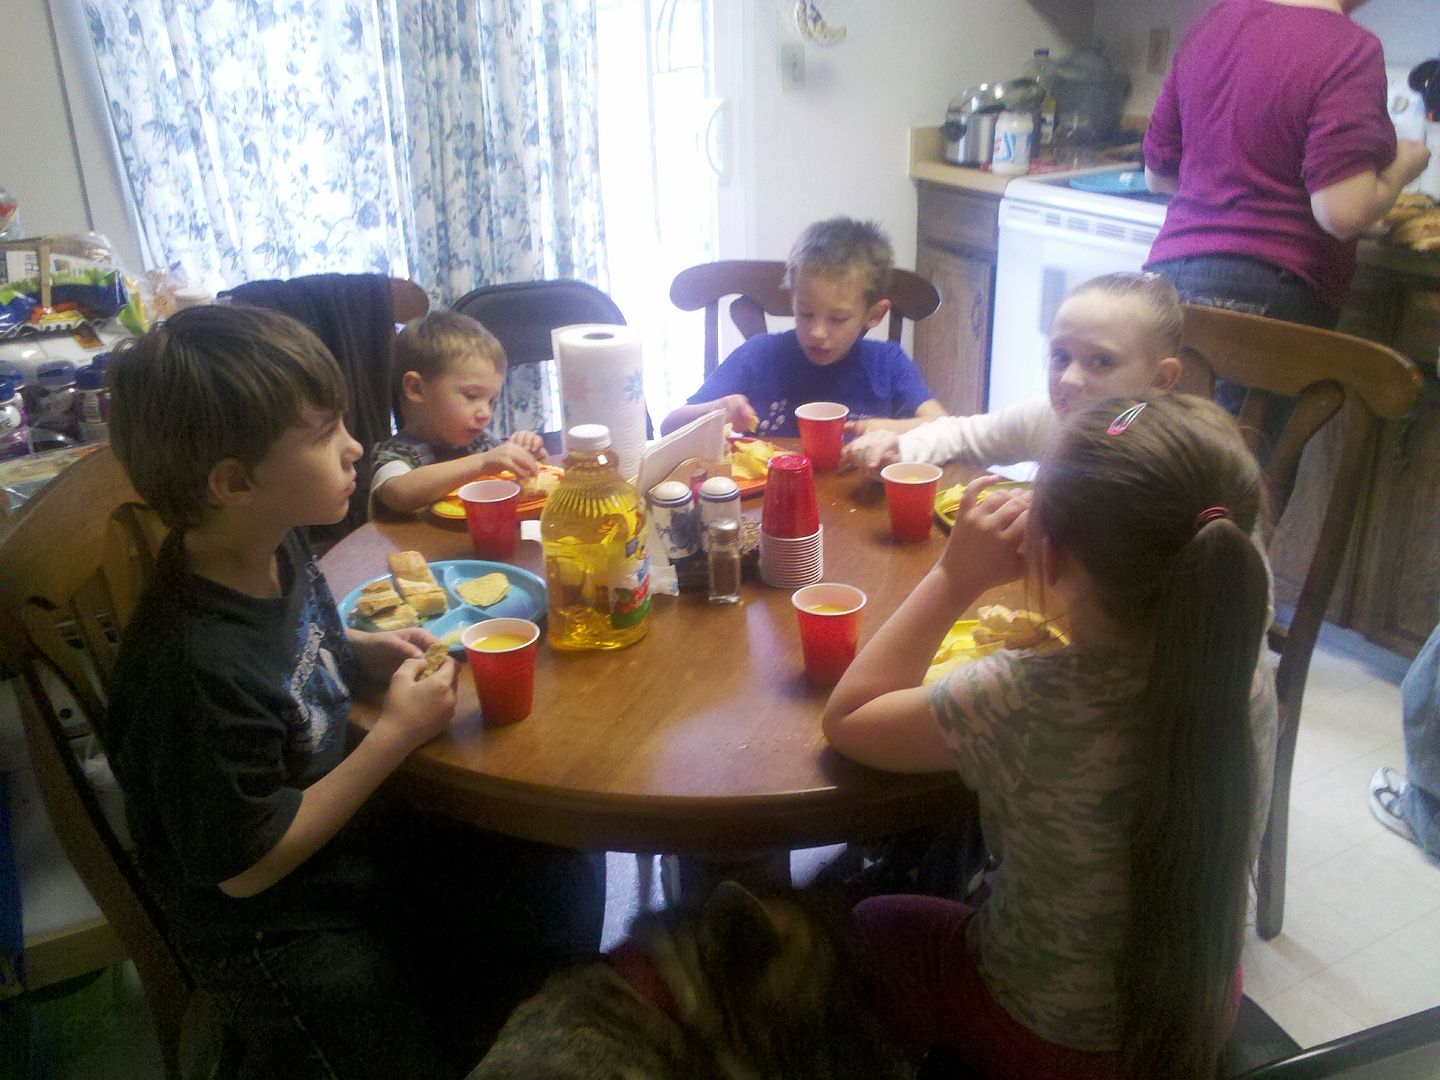 The great neices and nephews...so very adorable and polite! having an interesting conversation, &amp; making me smile